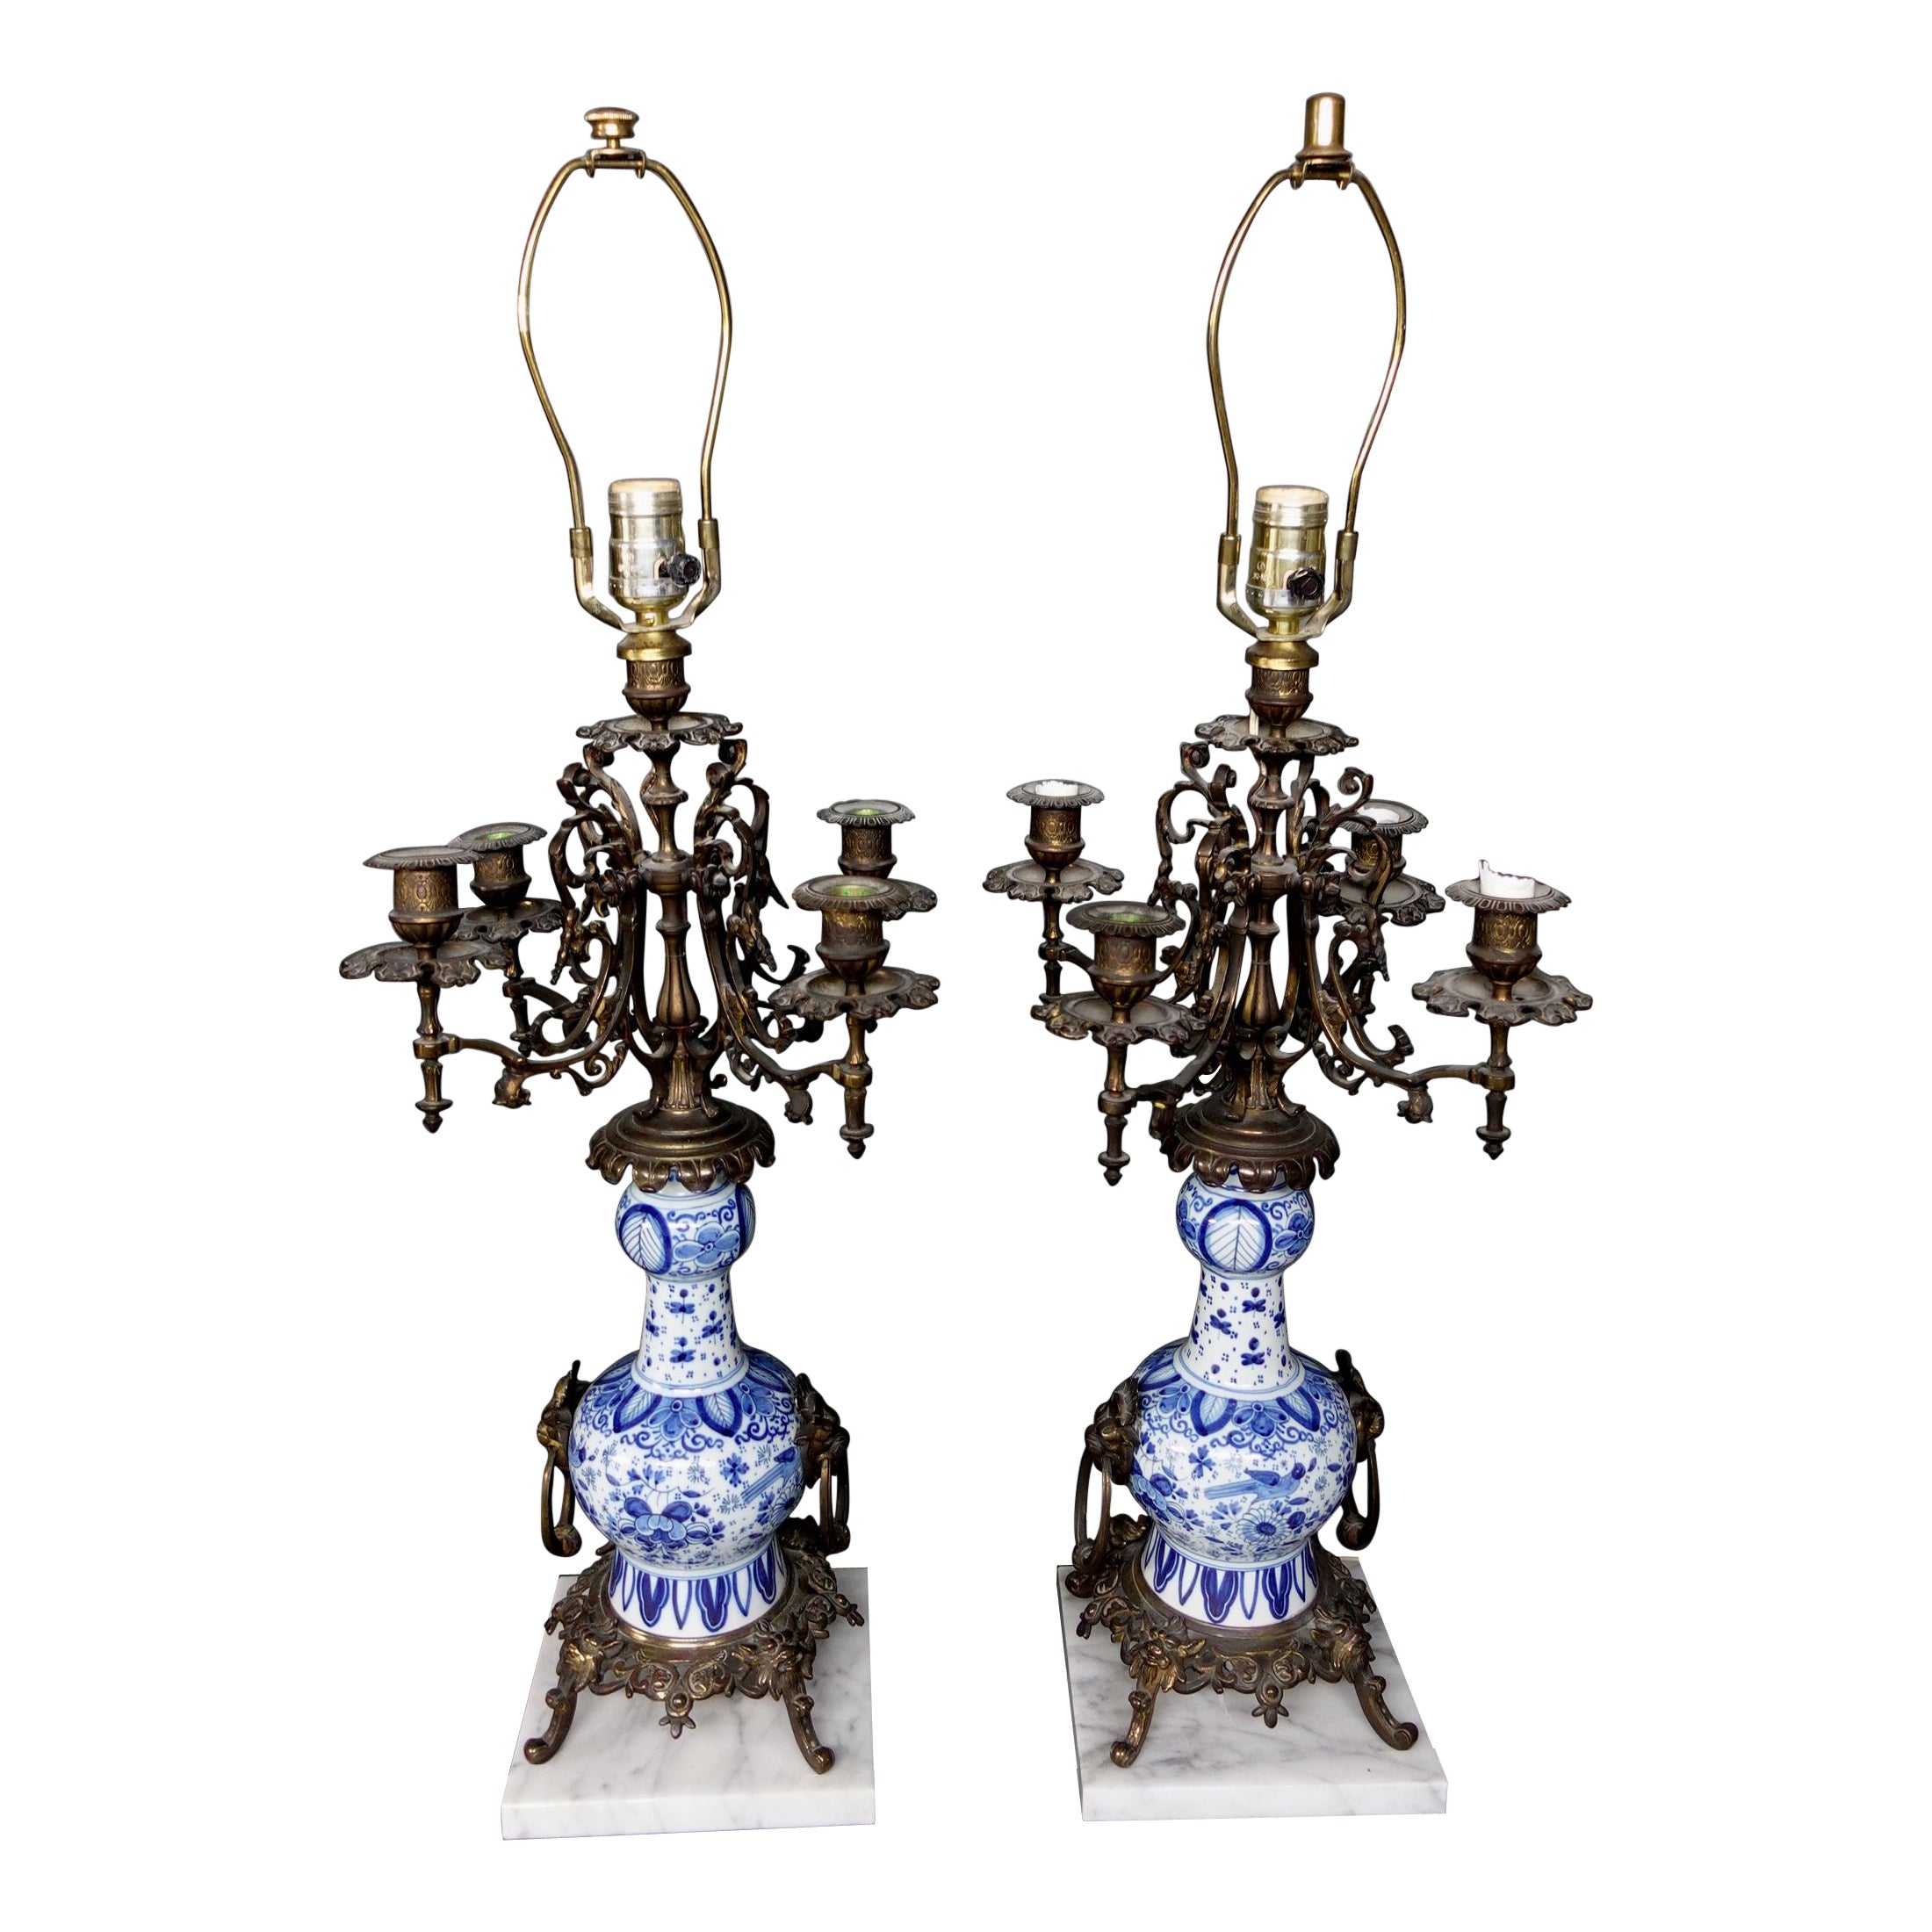 Pair of Blue and White Gilt-Bronze Candelabras and Lamps on Marble Bases